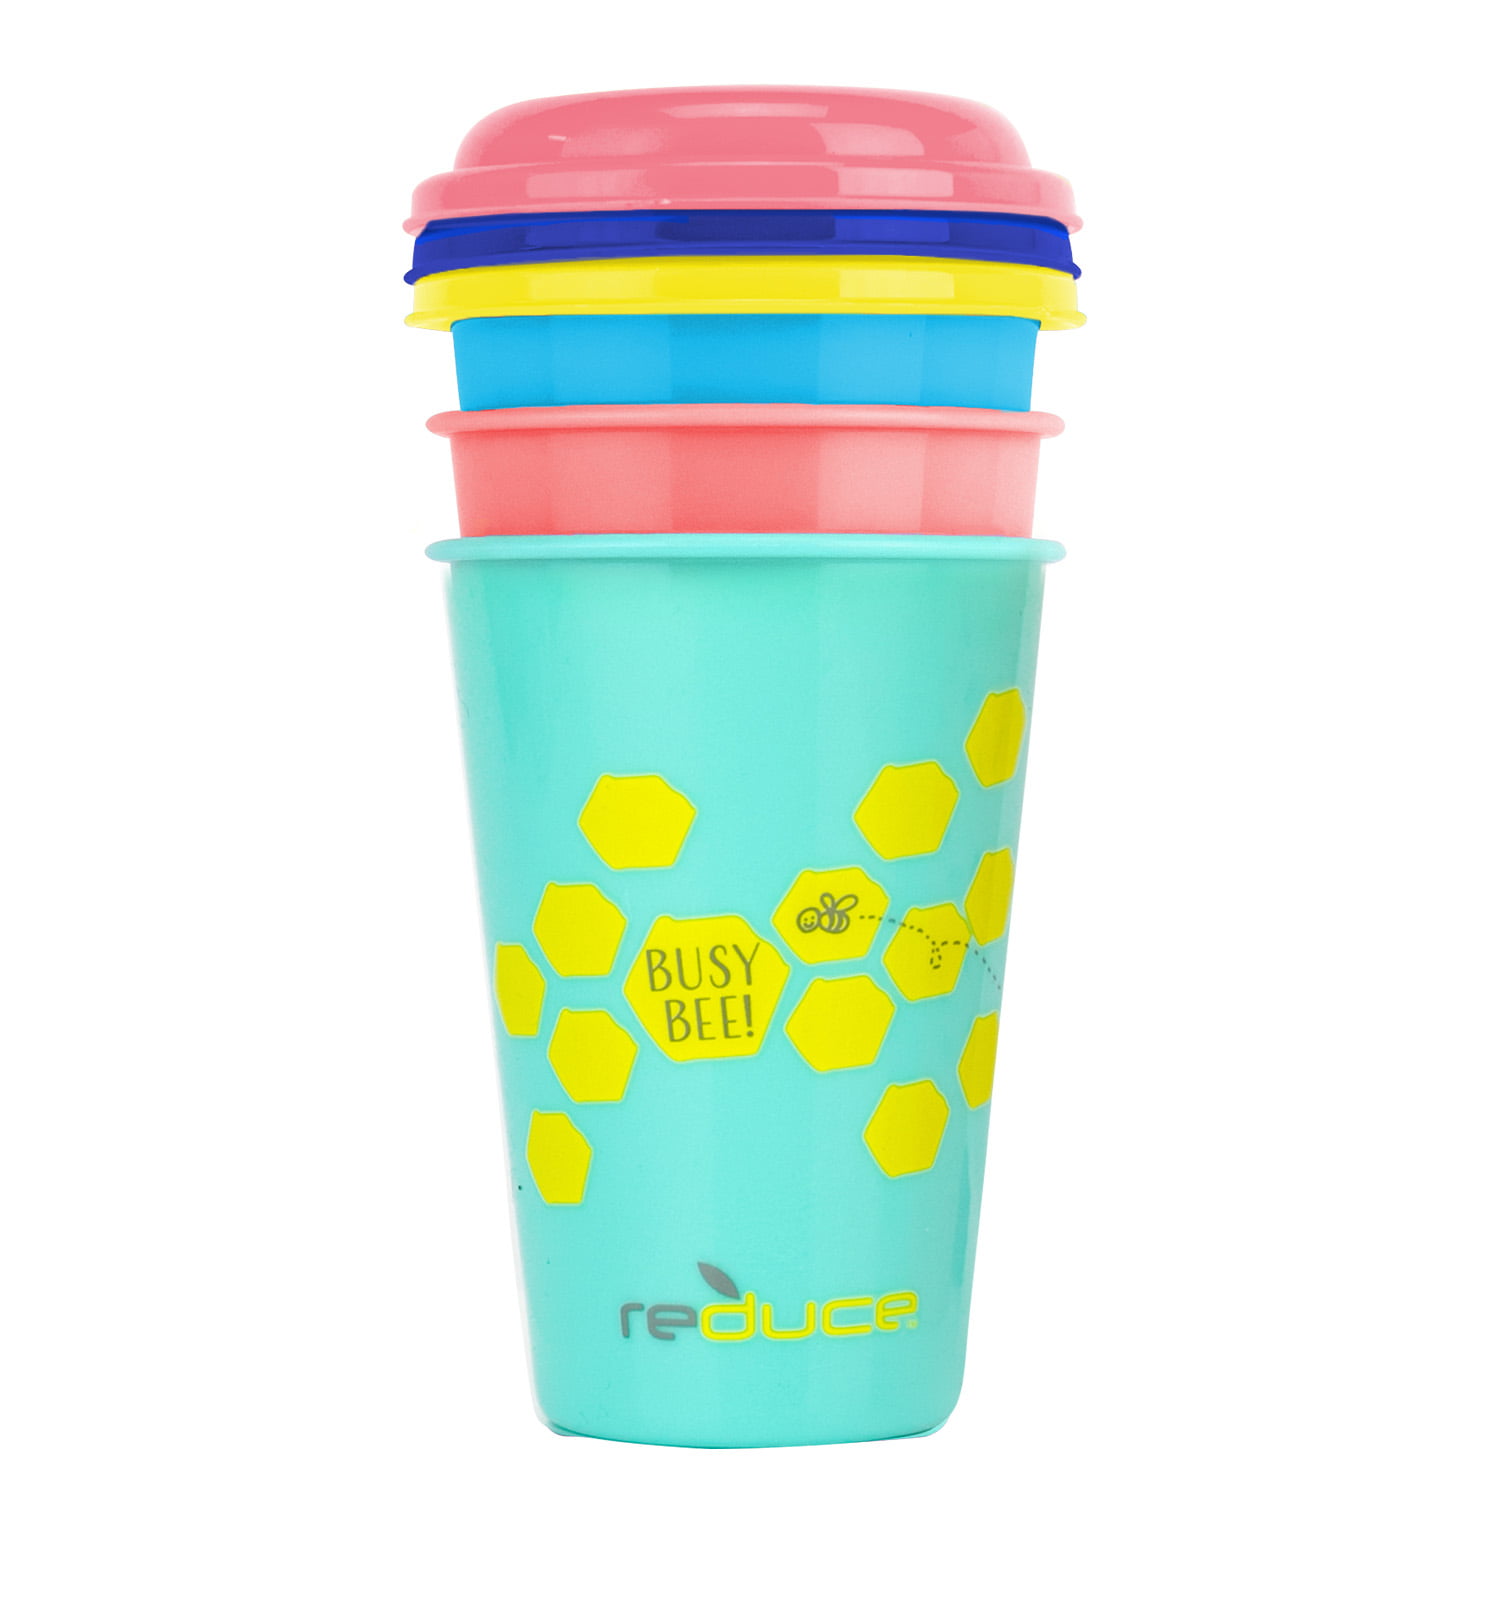 Reduce Go-Go's New Spill Proof 12oz Portable Drinkware with Straw  Serendipity Girl Set